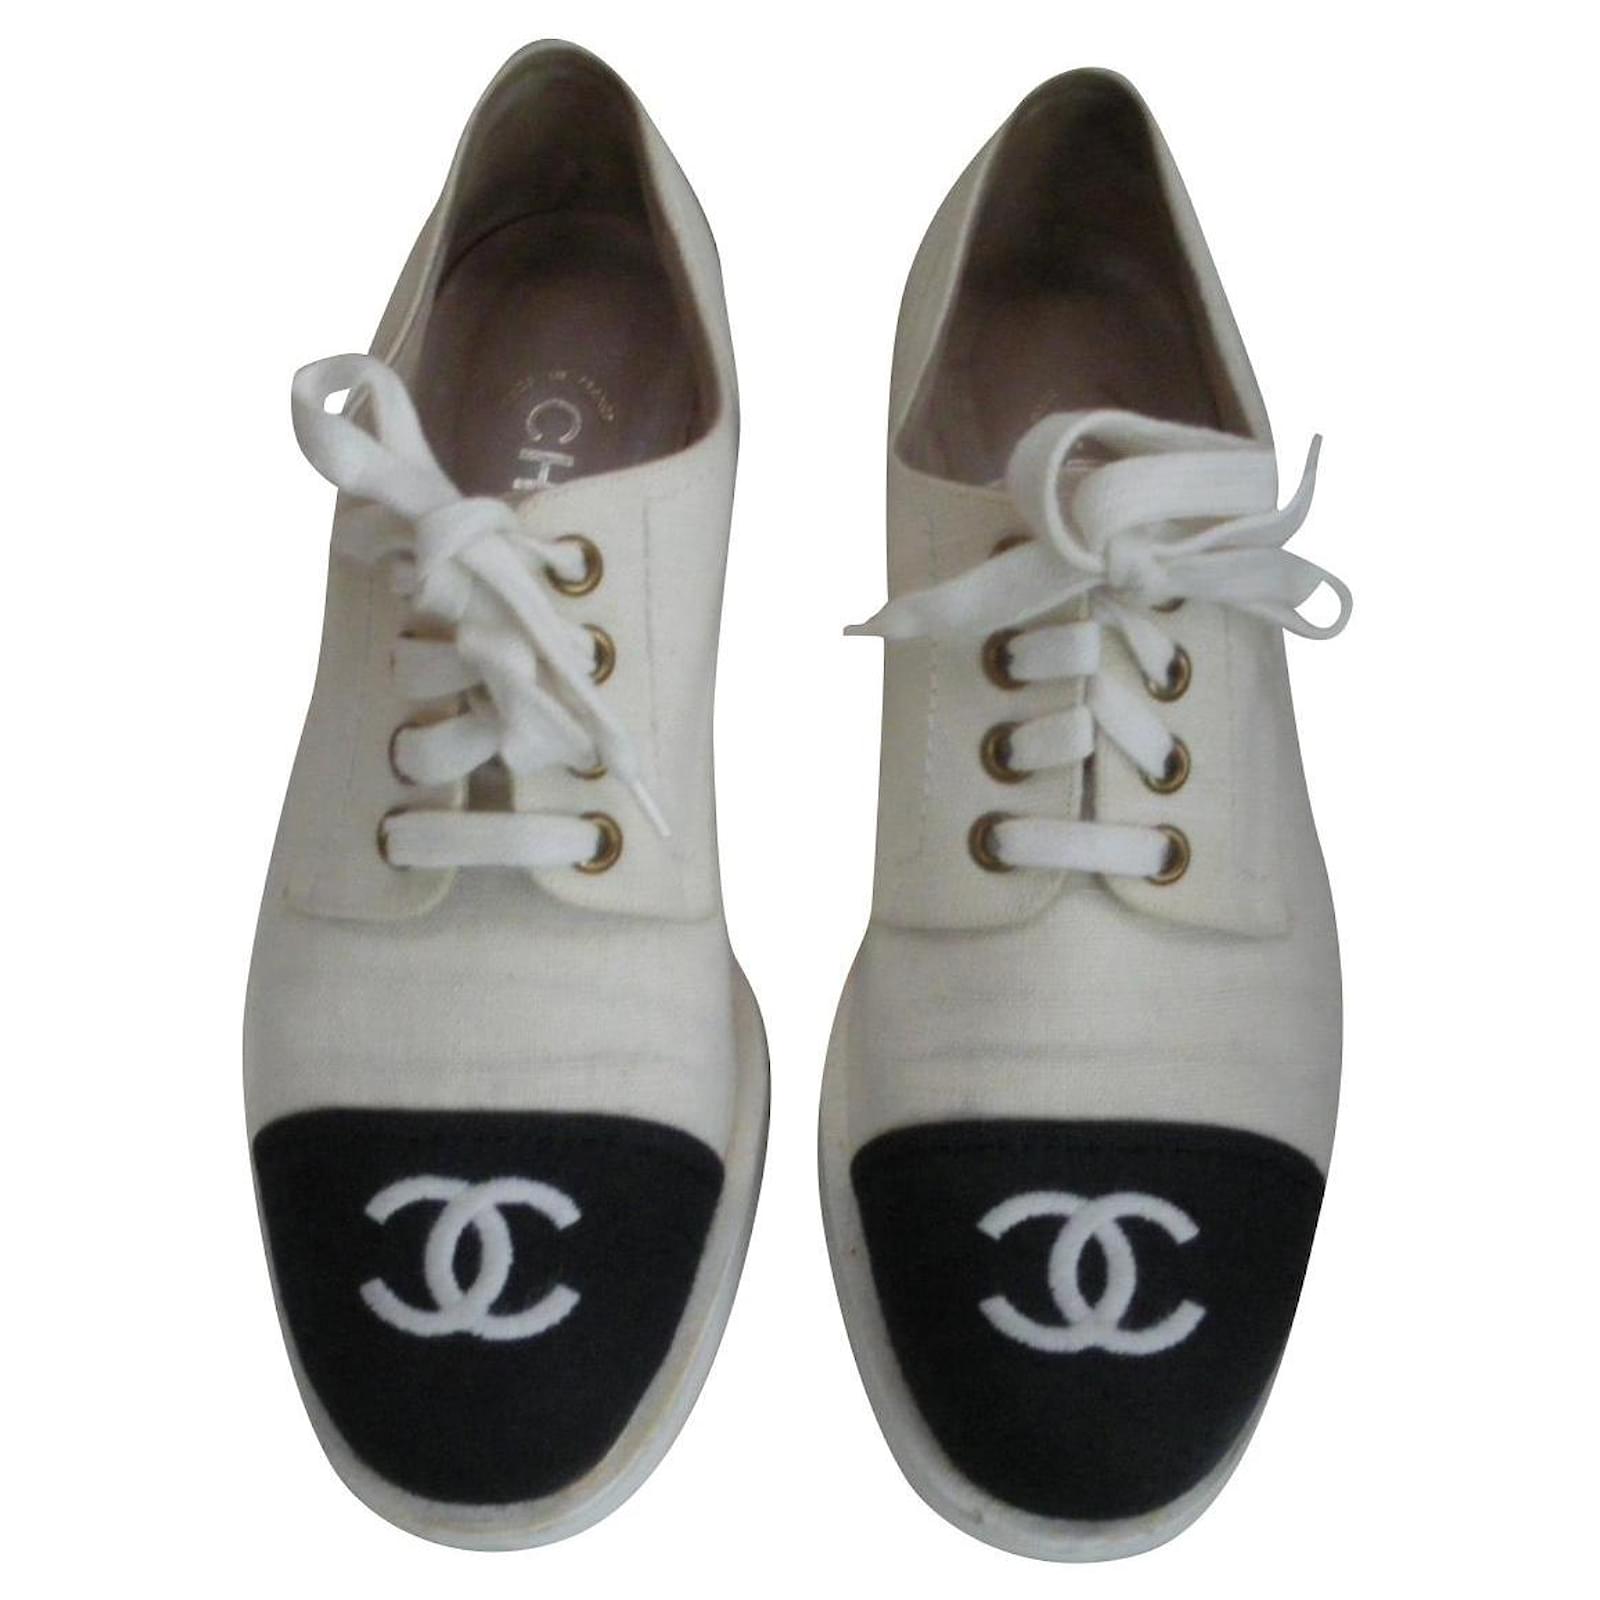 SOLD @ AUCTION * CHANEL Vintage Sneakers  Chanel shoes, Vintage chanel,  Vintage sneakers